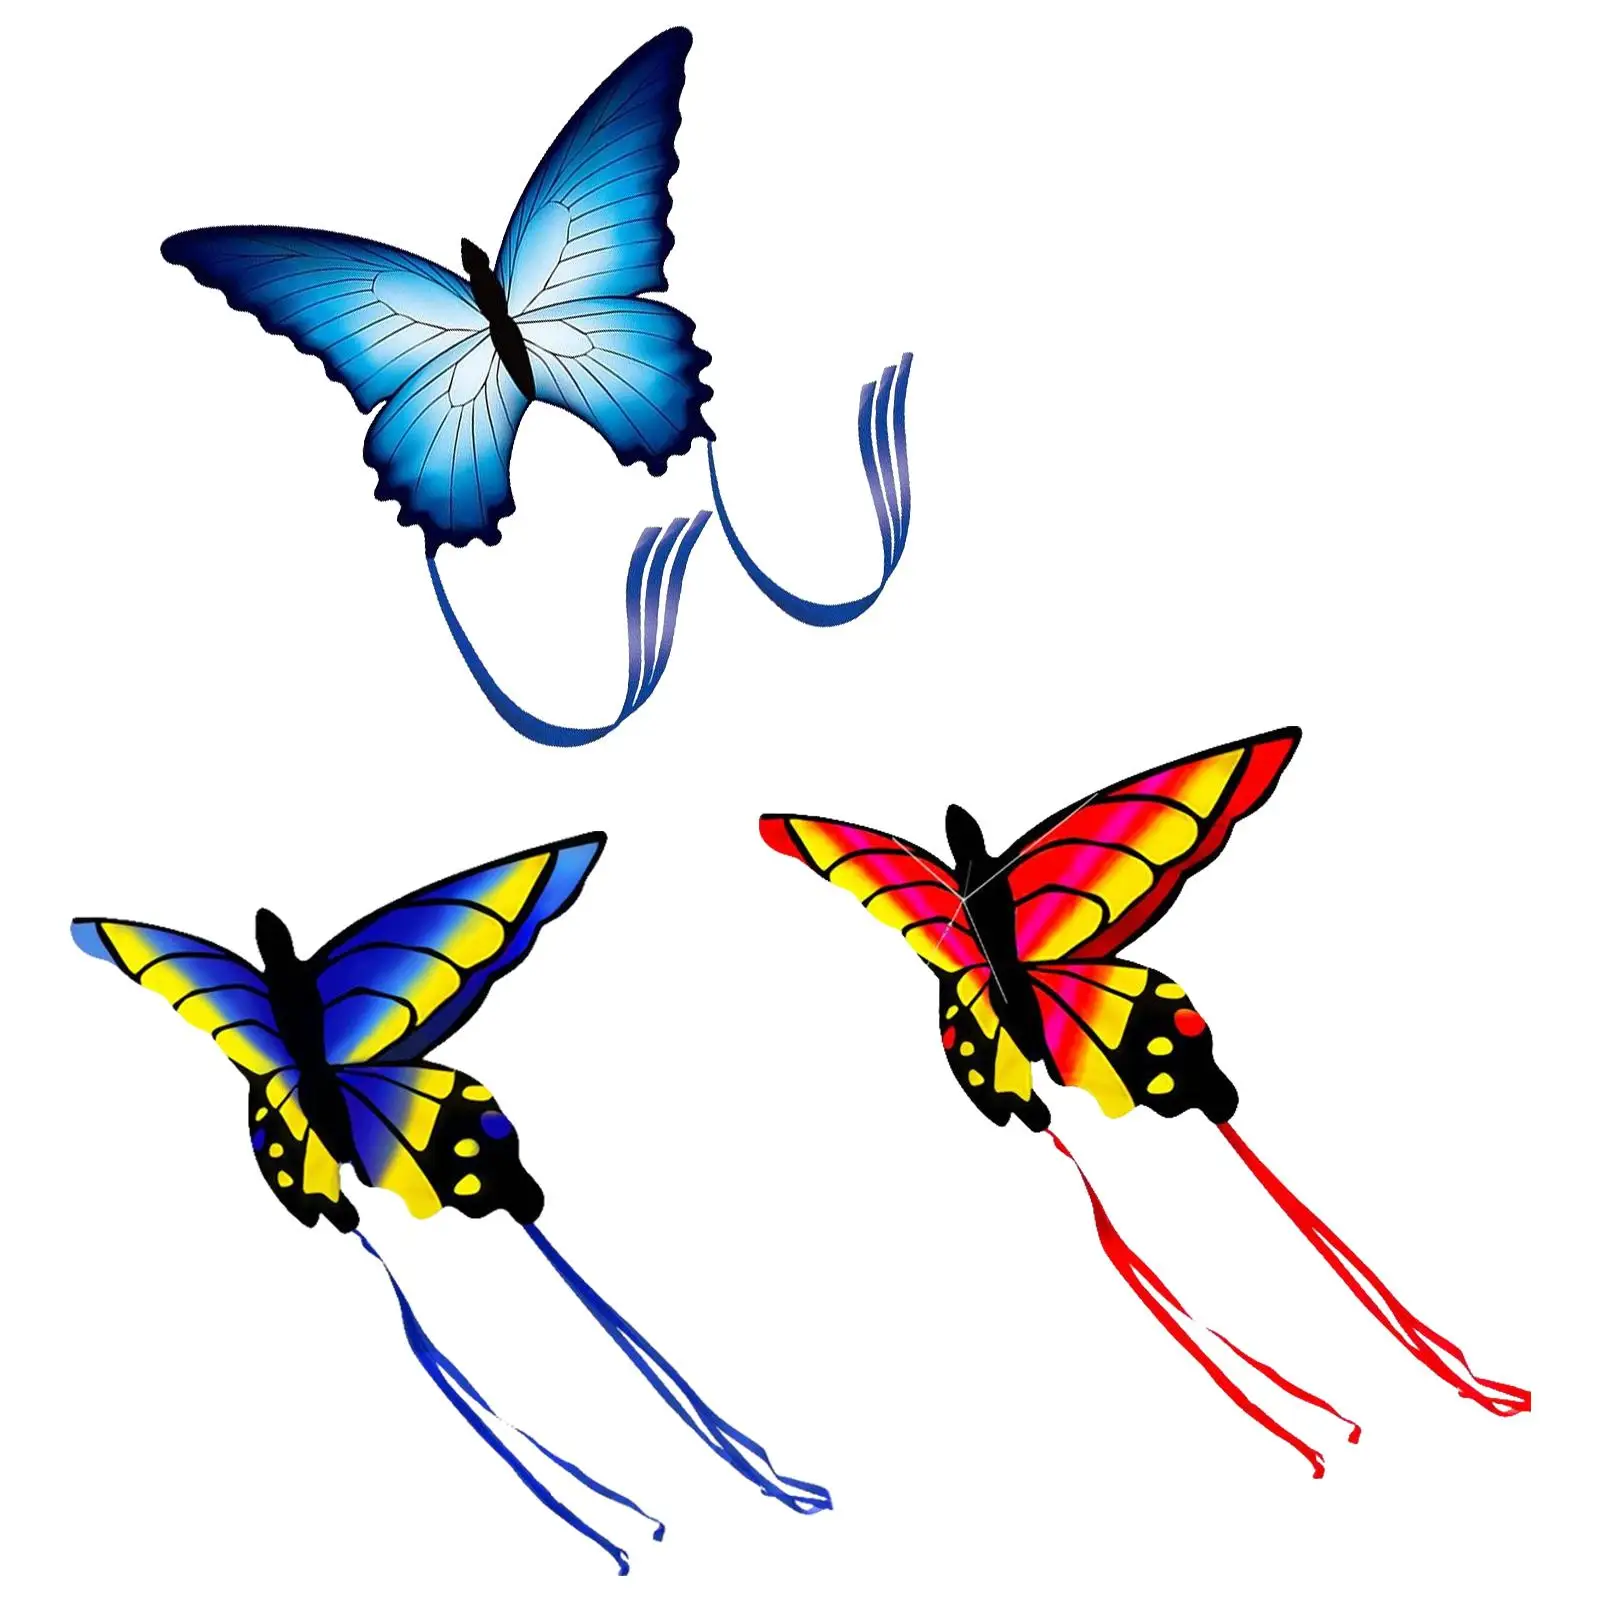 Butterfly Kite Flying Toys, Outdoor Sports, Beach Park Activity, for Children Gifts